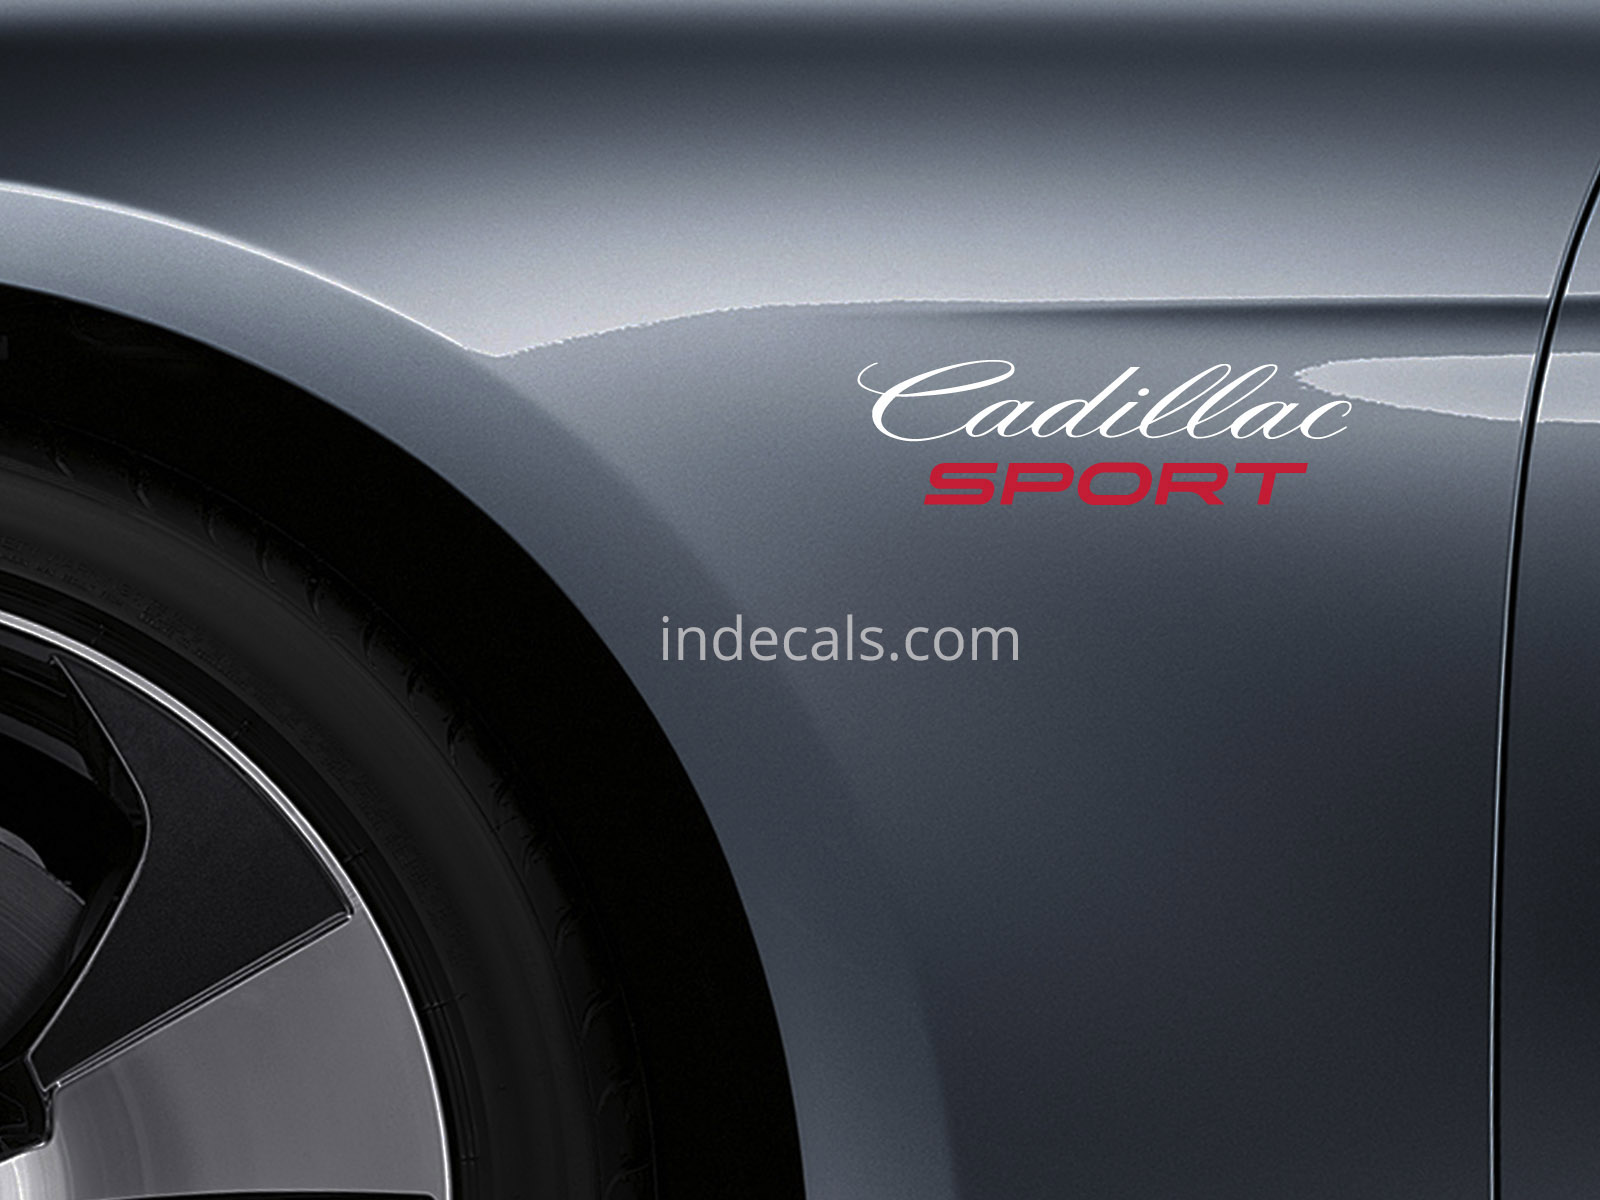 2 x Cadillac Sports Stickers for Wings - White & Red